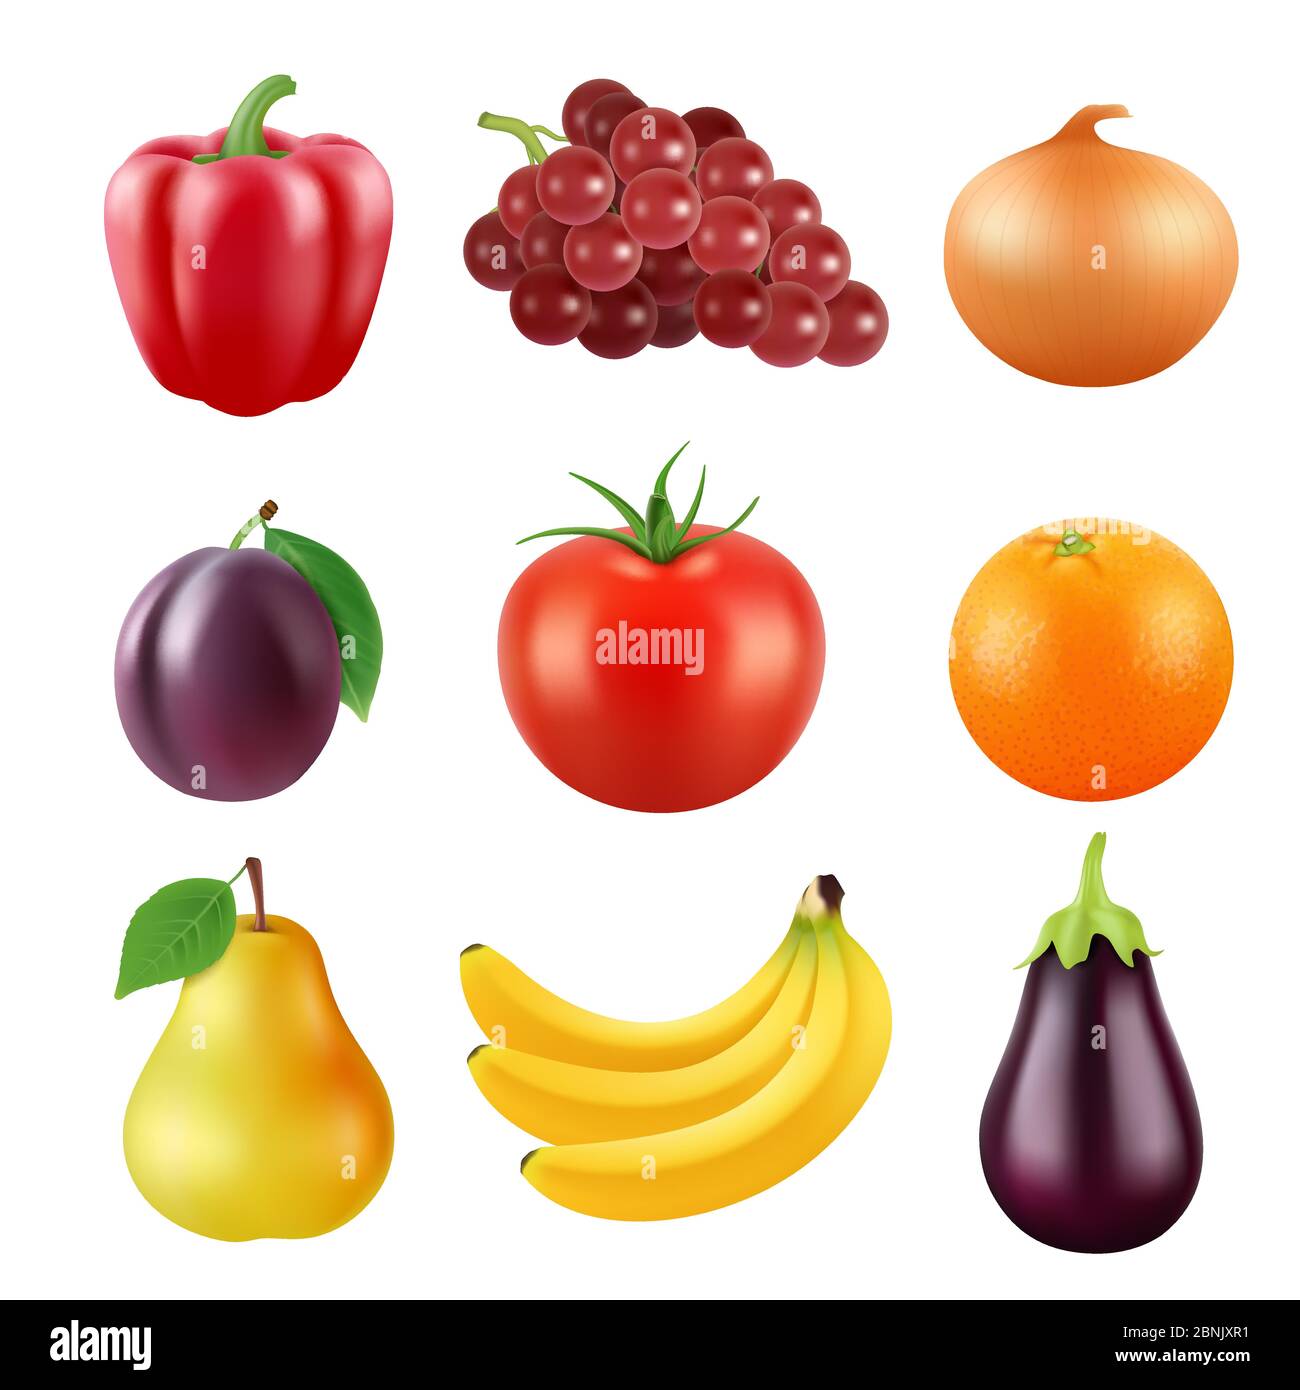 https://c8.alamy.com/comp/2BNJXR1/realistic-vector-pictures-of-fresh-fruits-and-vegetables-2BNJXR1.jpg